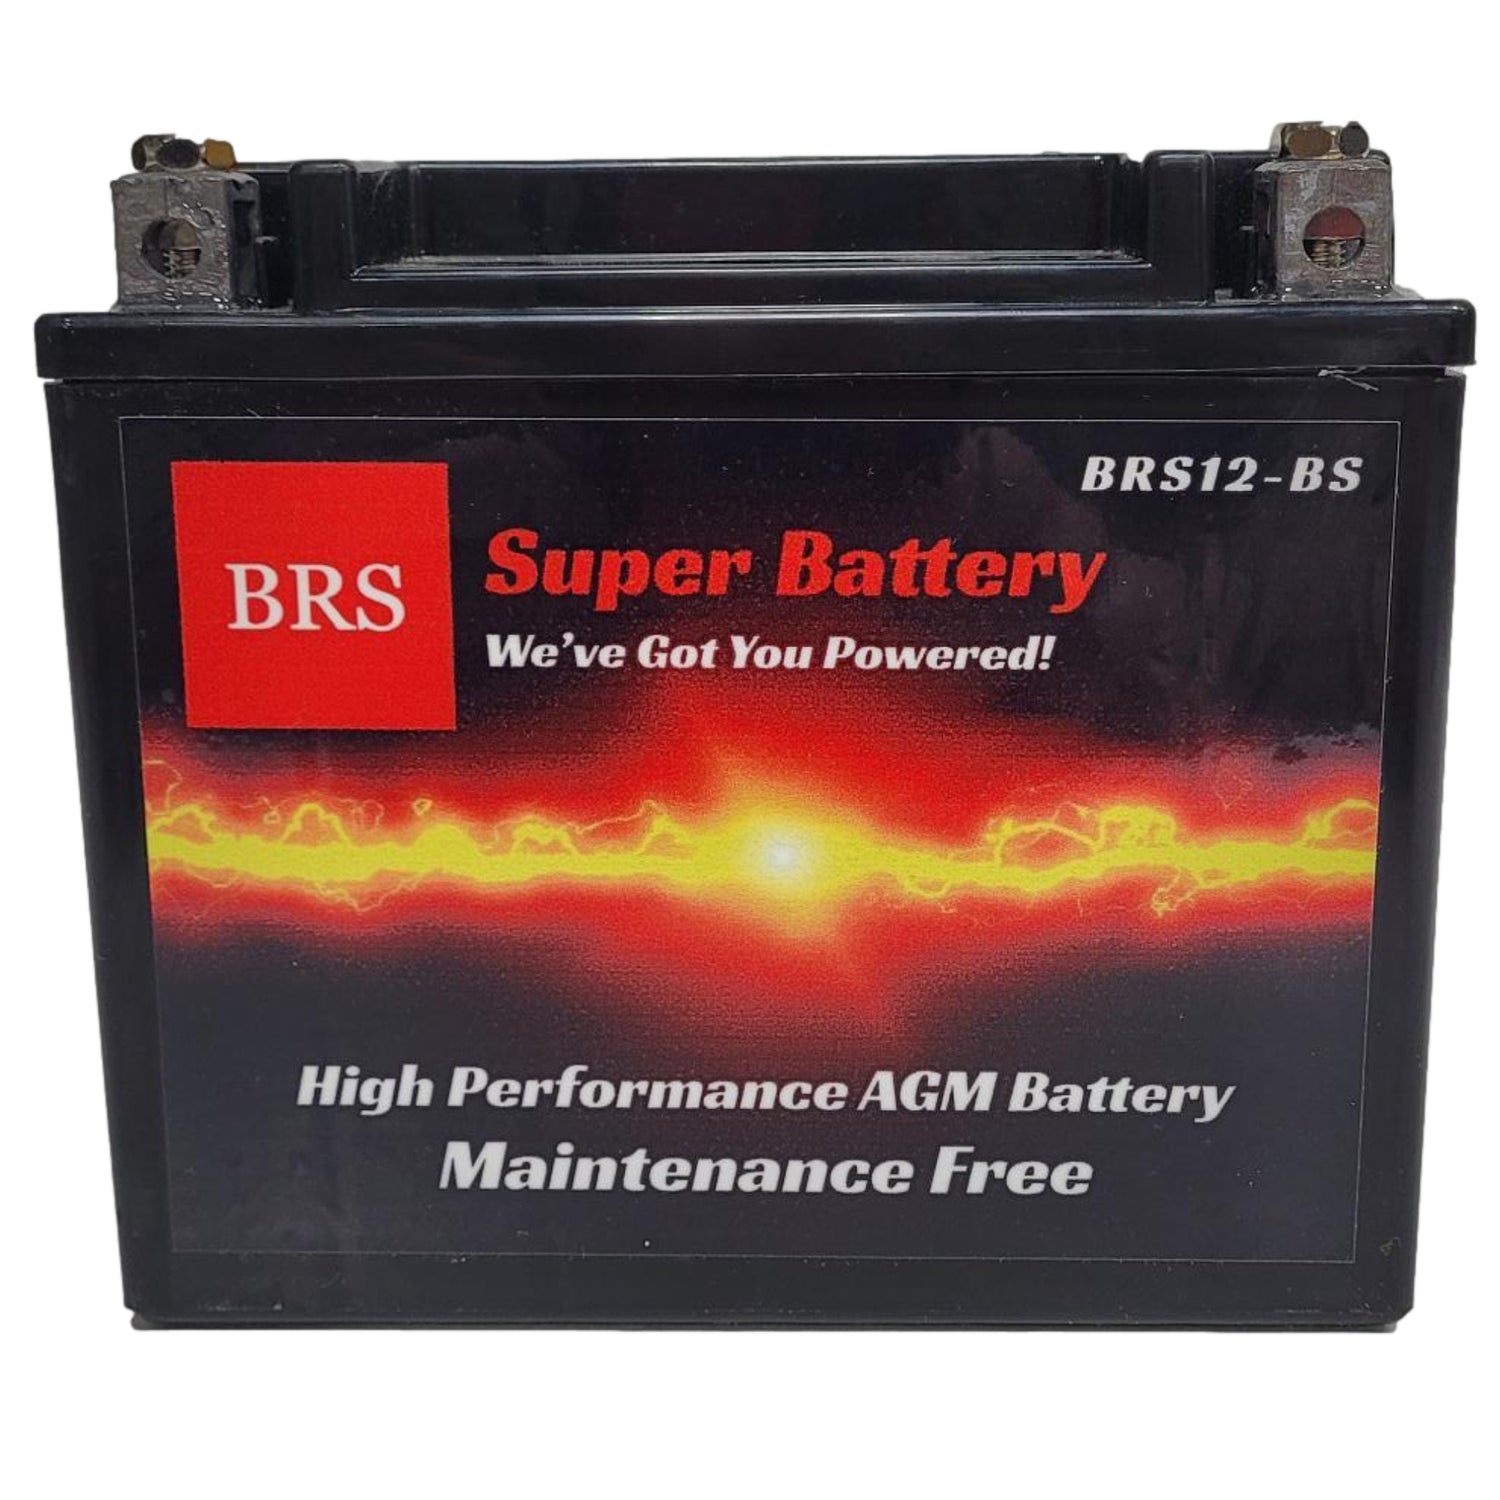 WPX12-BS 12v High Performance Sealed AGM PowerSport 2 Year Battery - BRS Super Battery